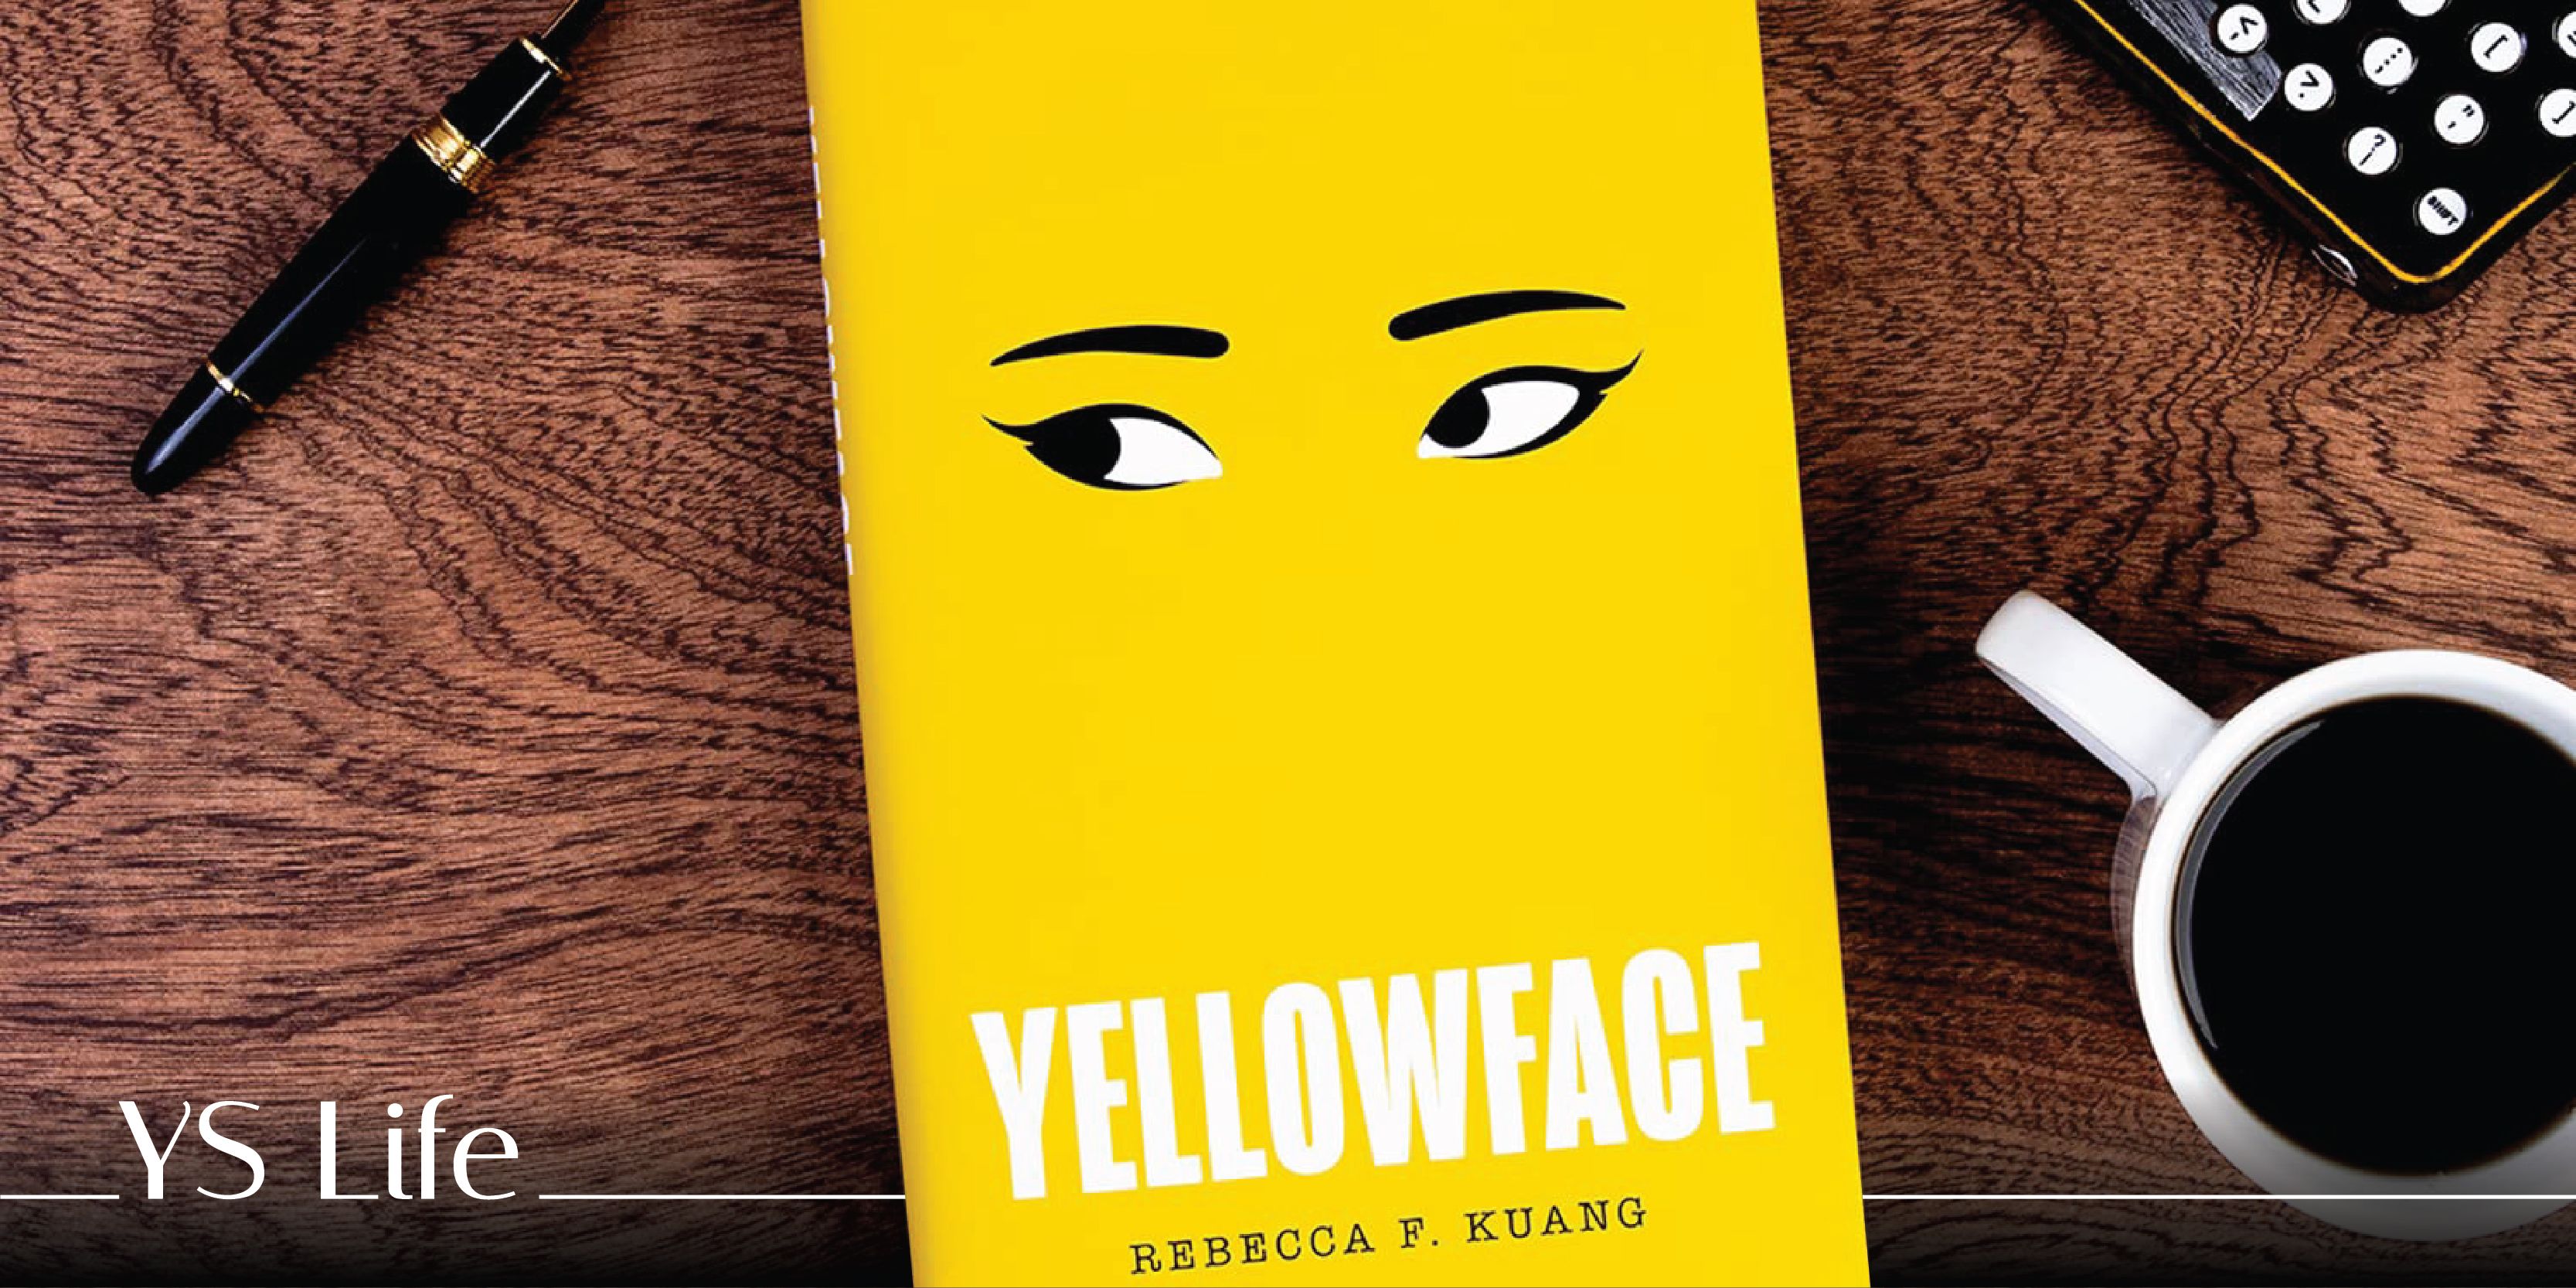 Yellowface is a near-perfect satire on privilege, identity and spectre of social media trials